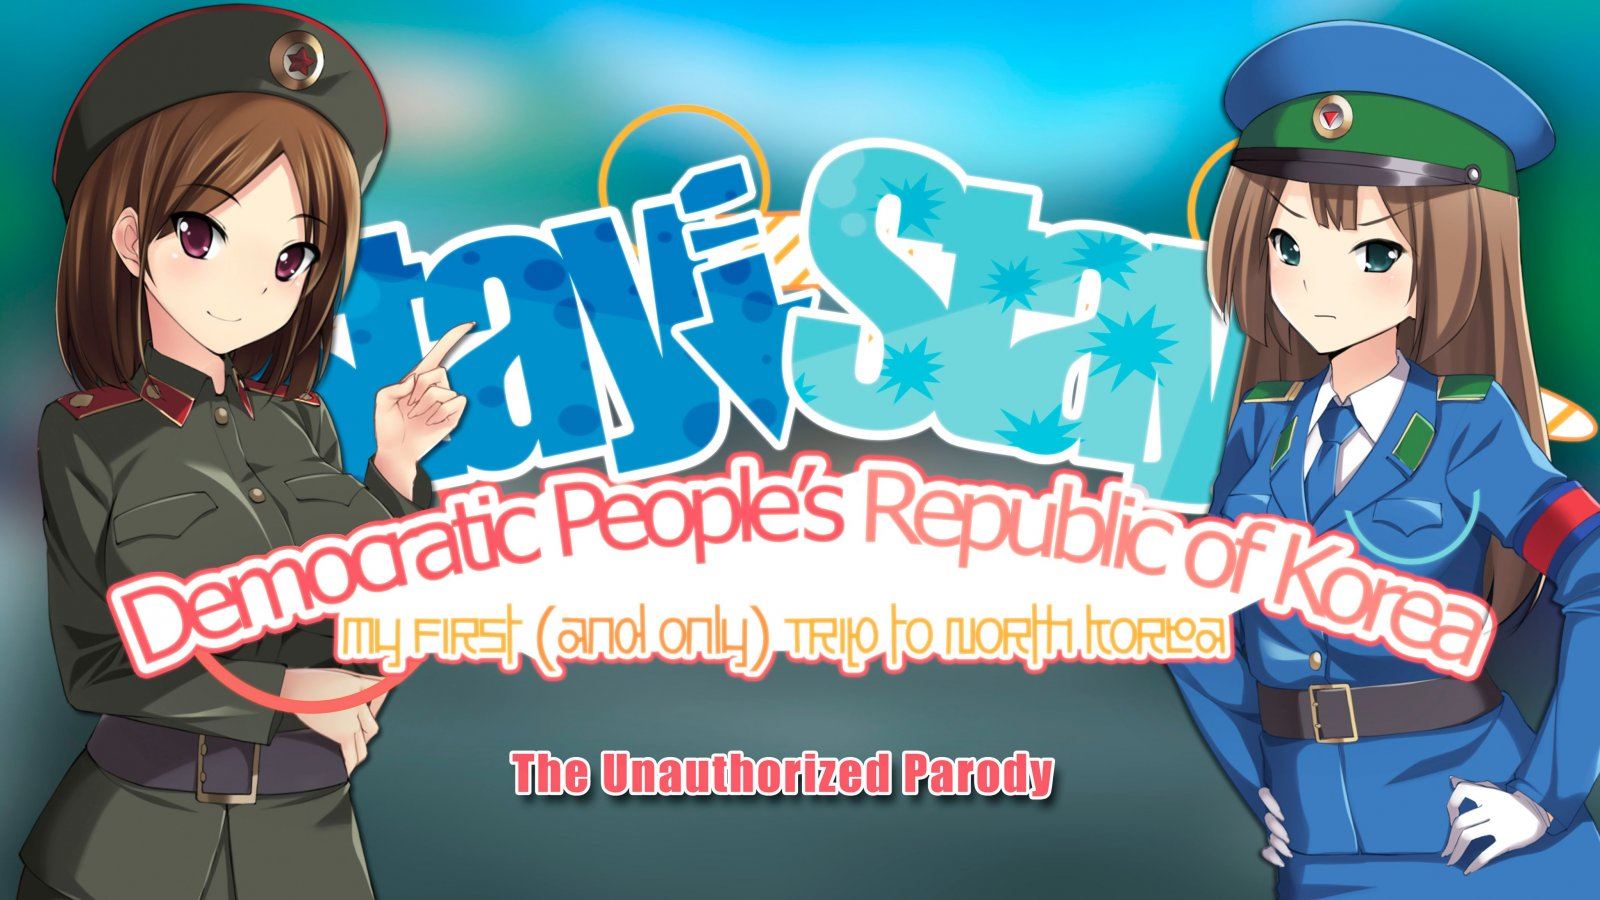 Stay! Stay! Democratic People’s Republic Of Korea porn xxx game download cover